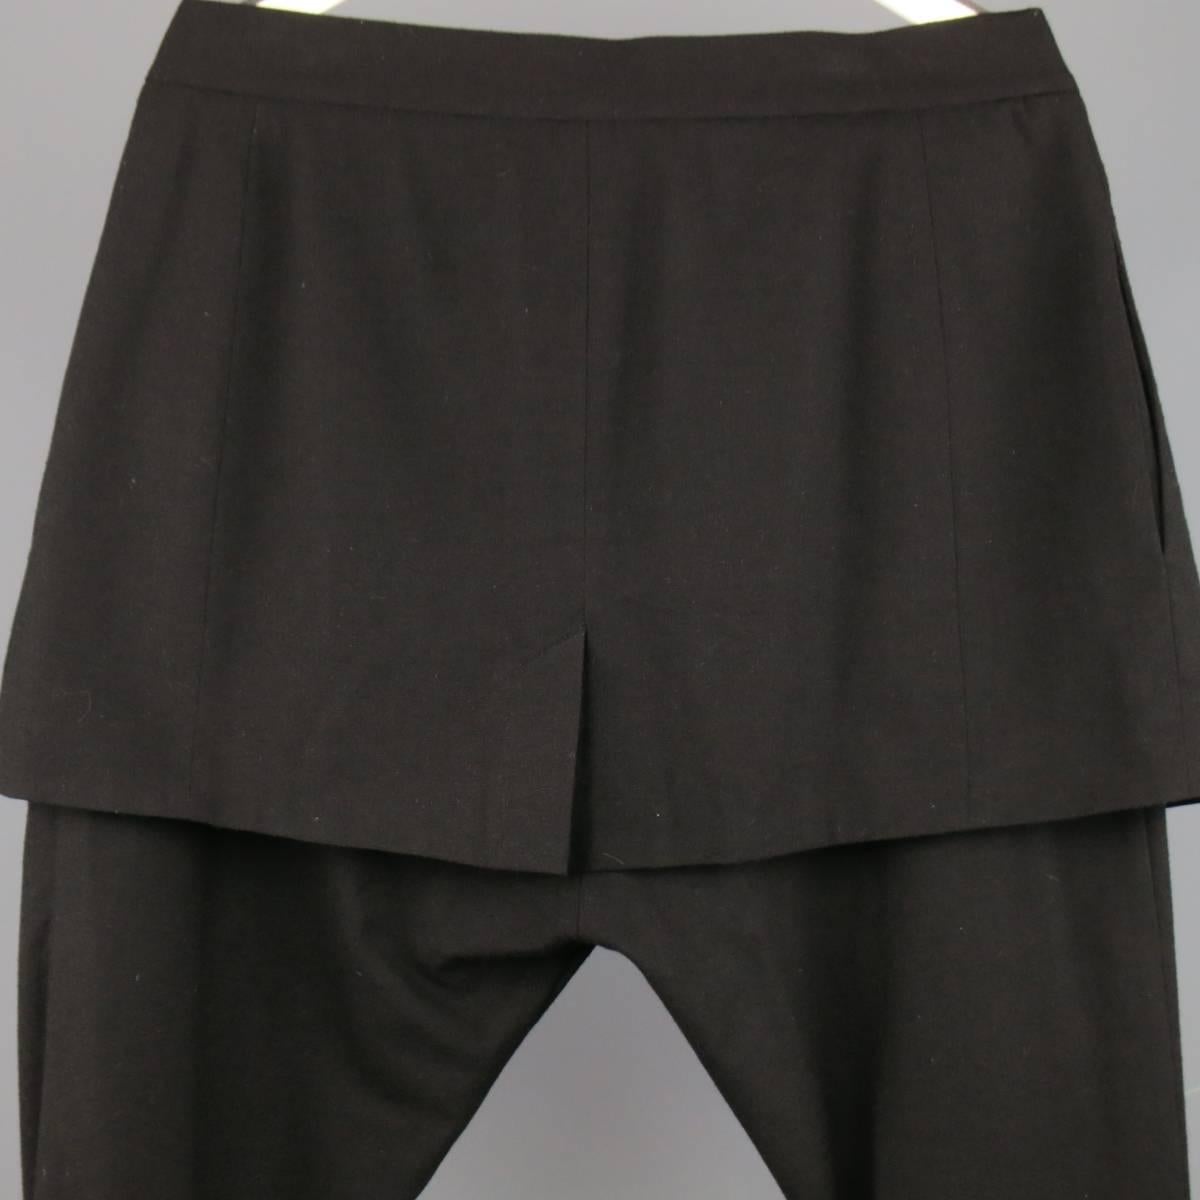 men's pants with skirt overlay